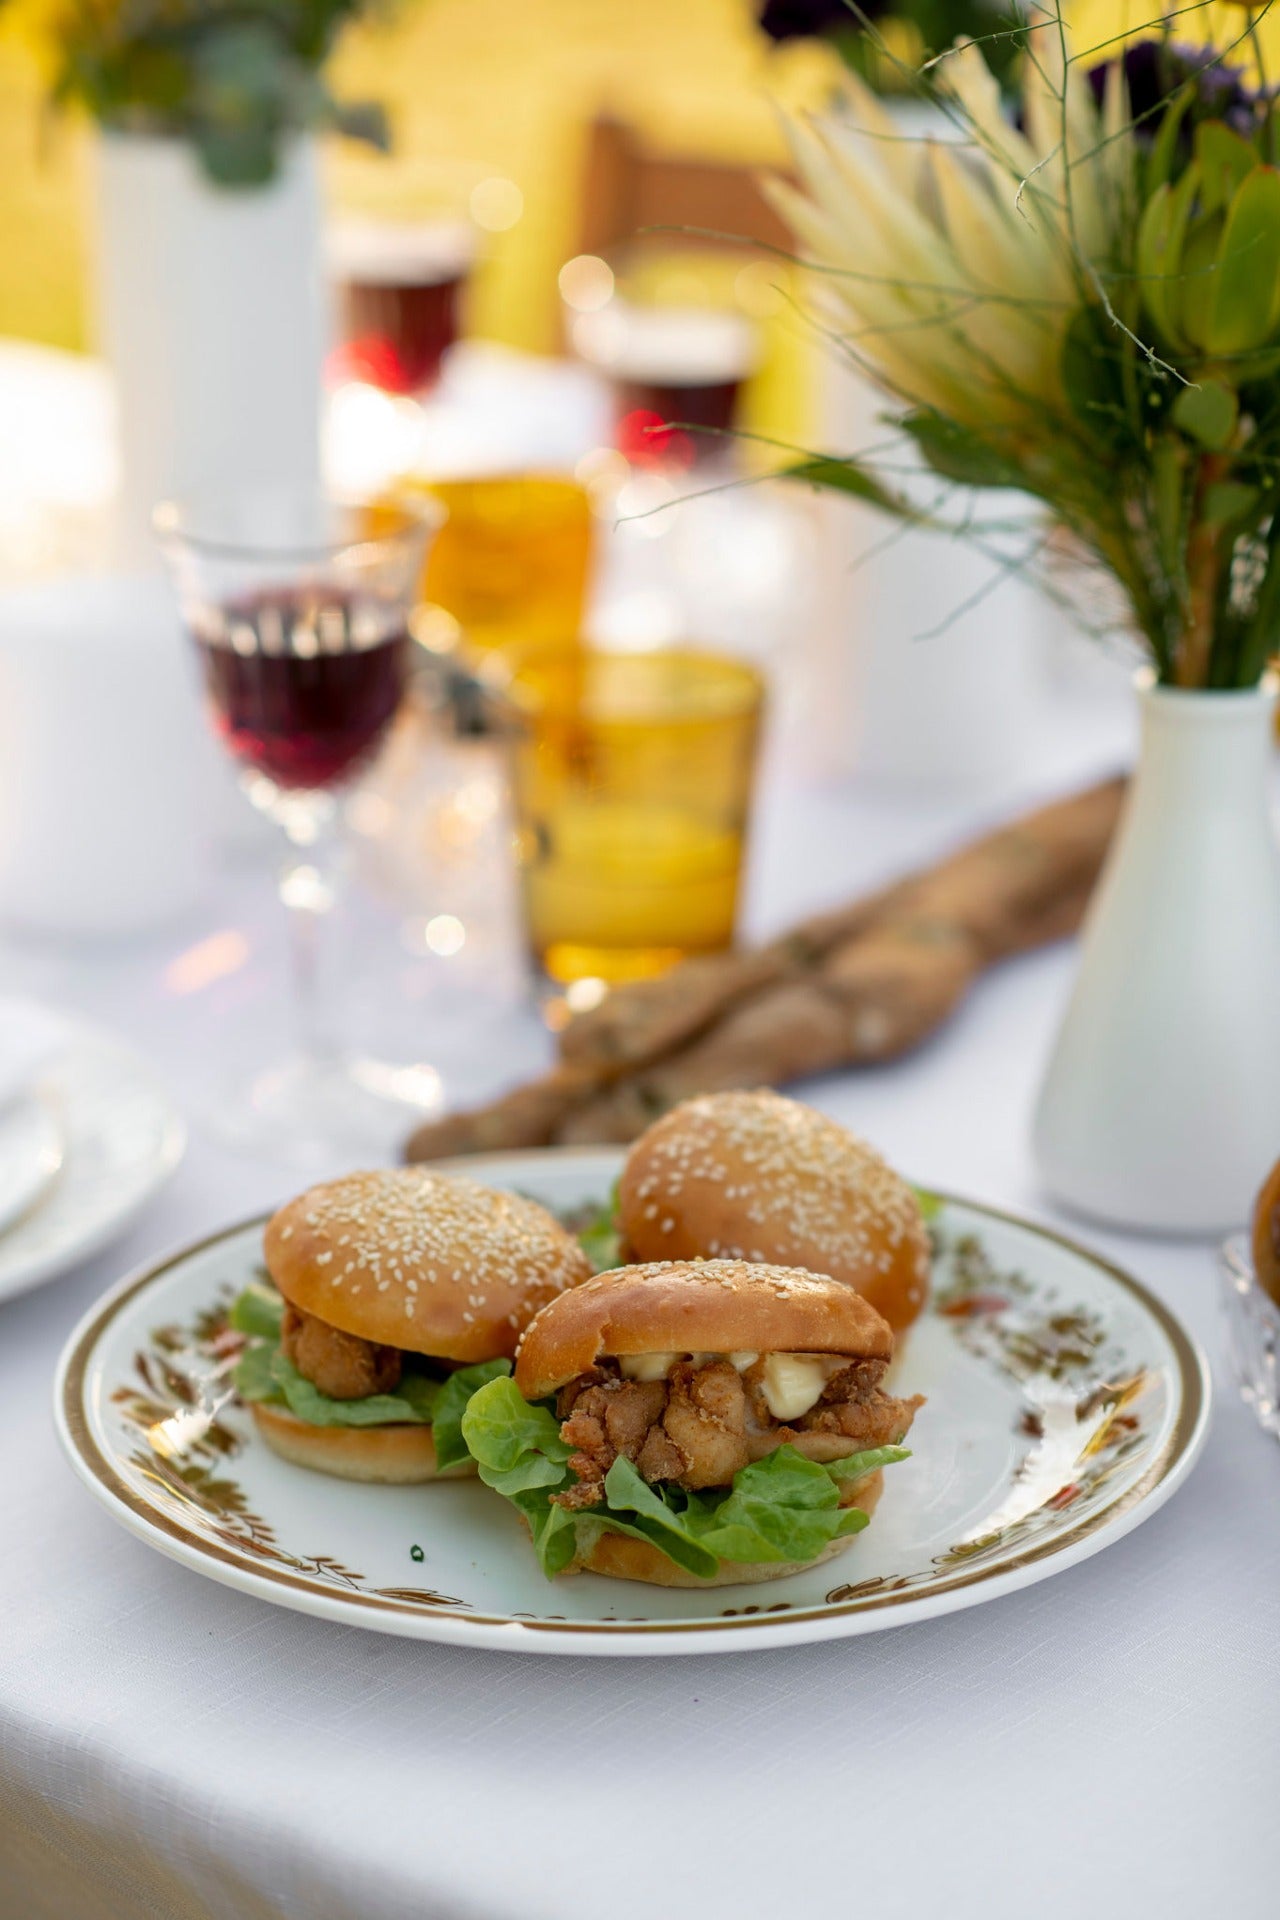 Catering Melbourne - Private & Corporate Catering,